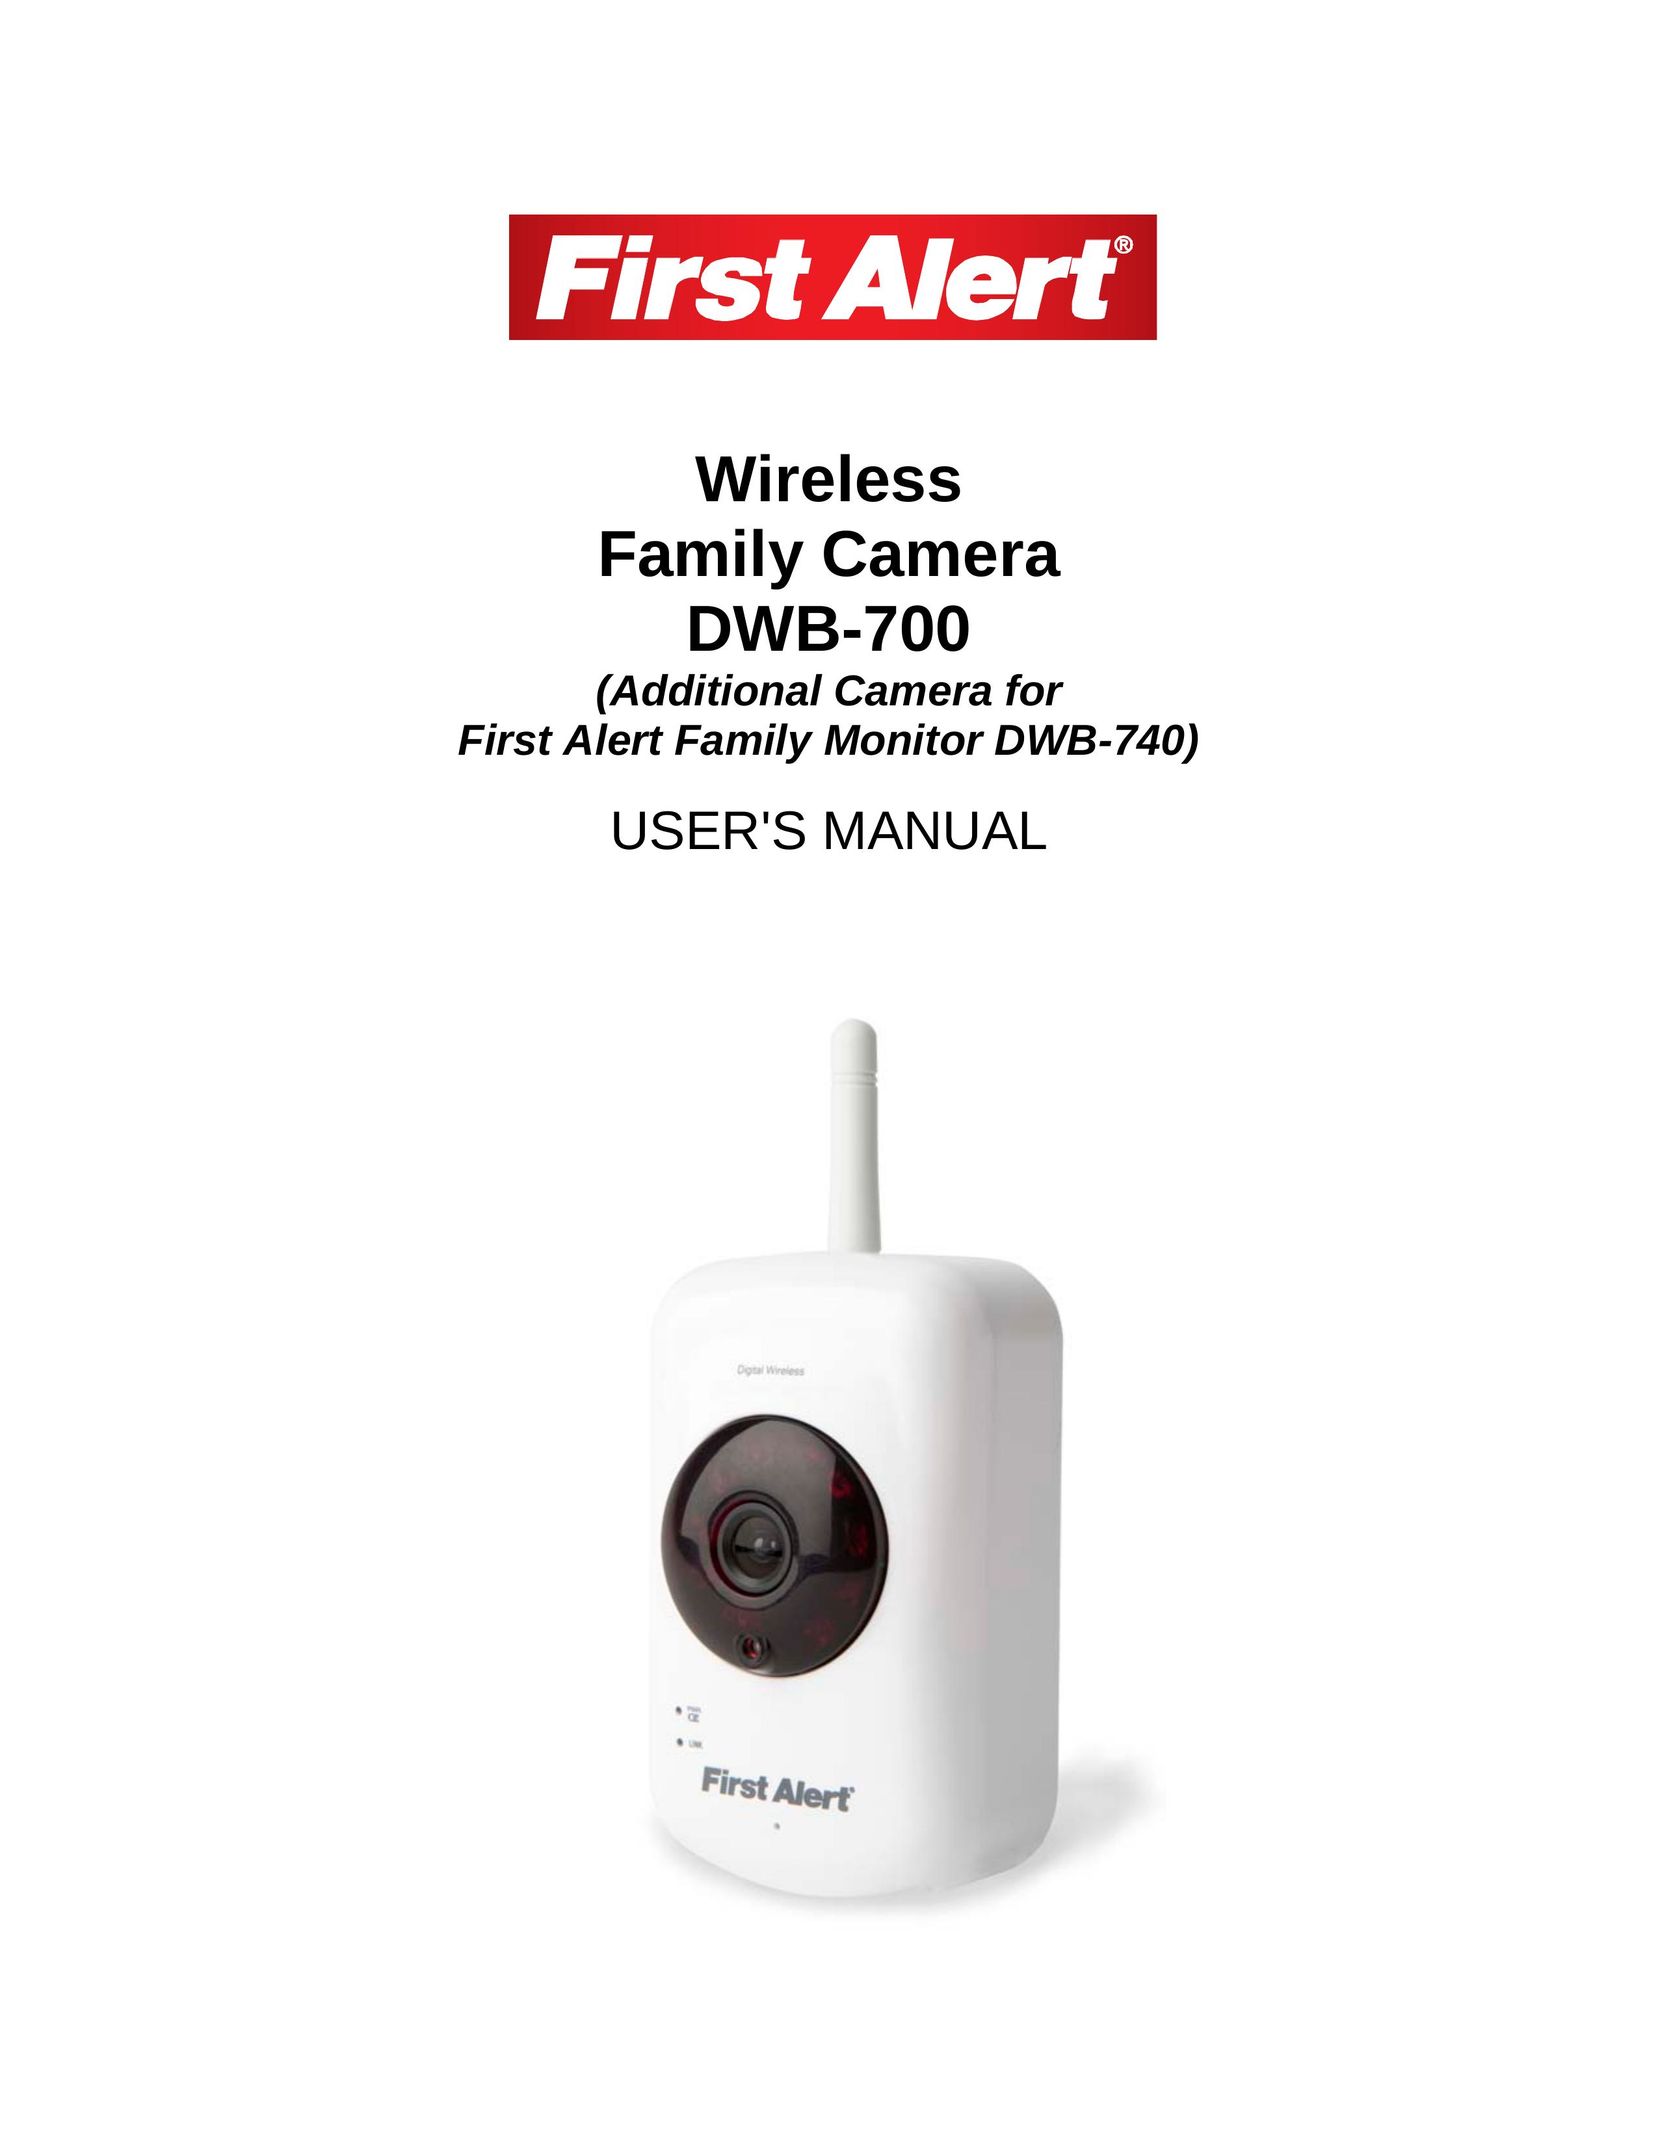 First Alert DWB-740 Home Security System User Manual